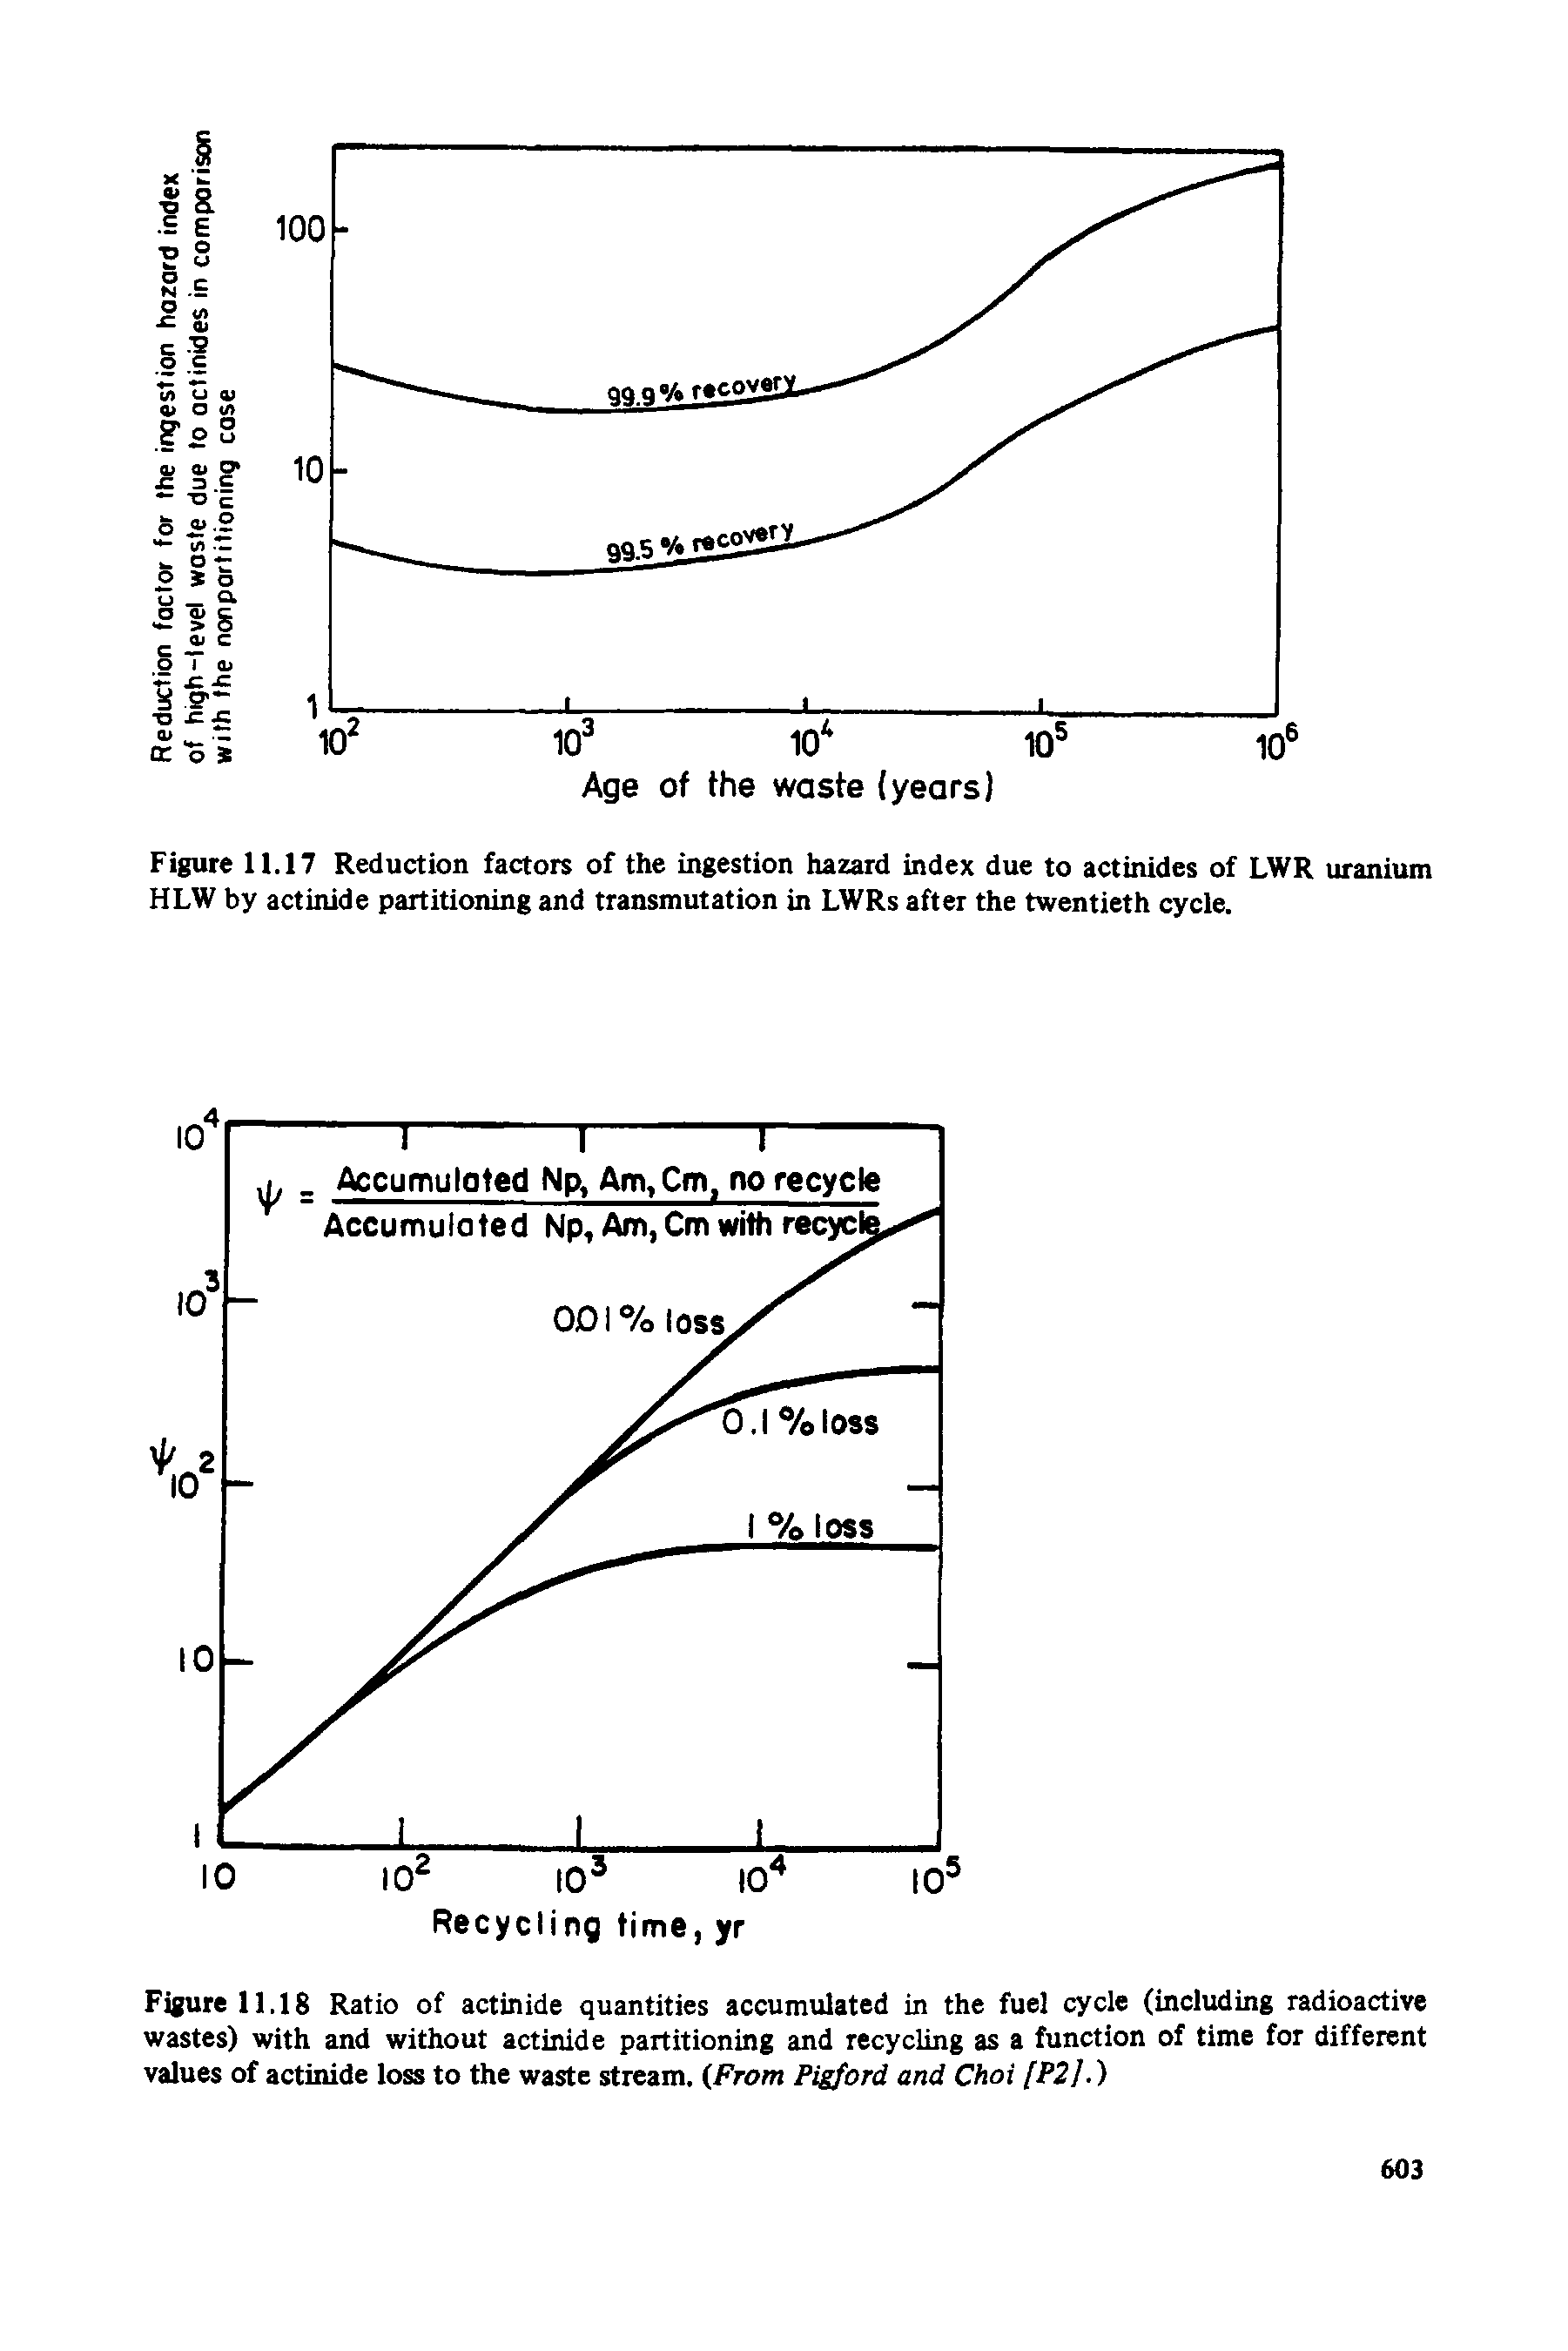 Figure 11,18 Ratio of actinide quantities accumulated in the fuel cycle (including radioactive wastes) with and without actinide partitioning and recycling as a function of time for different values of actinide loss to the waste stream. From Pigford and Choi [P2J.)...